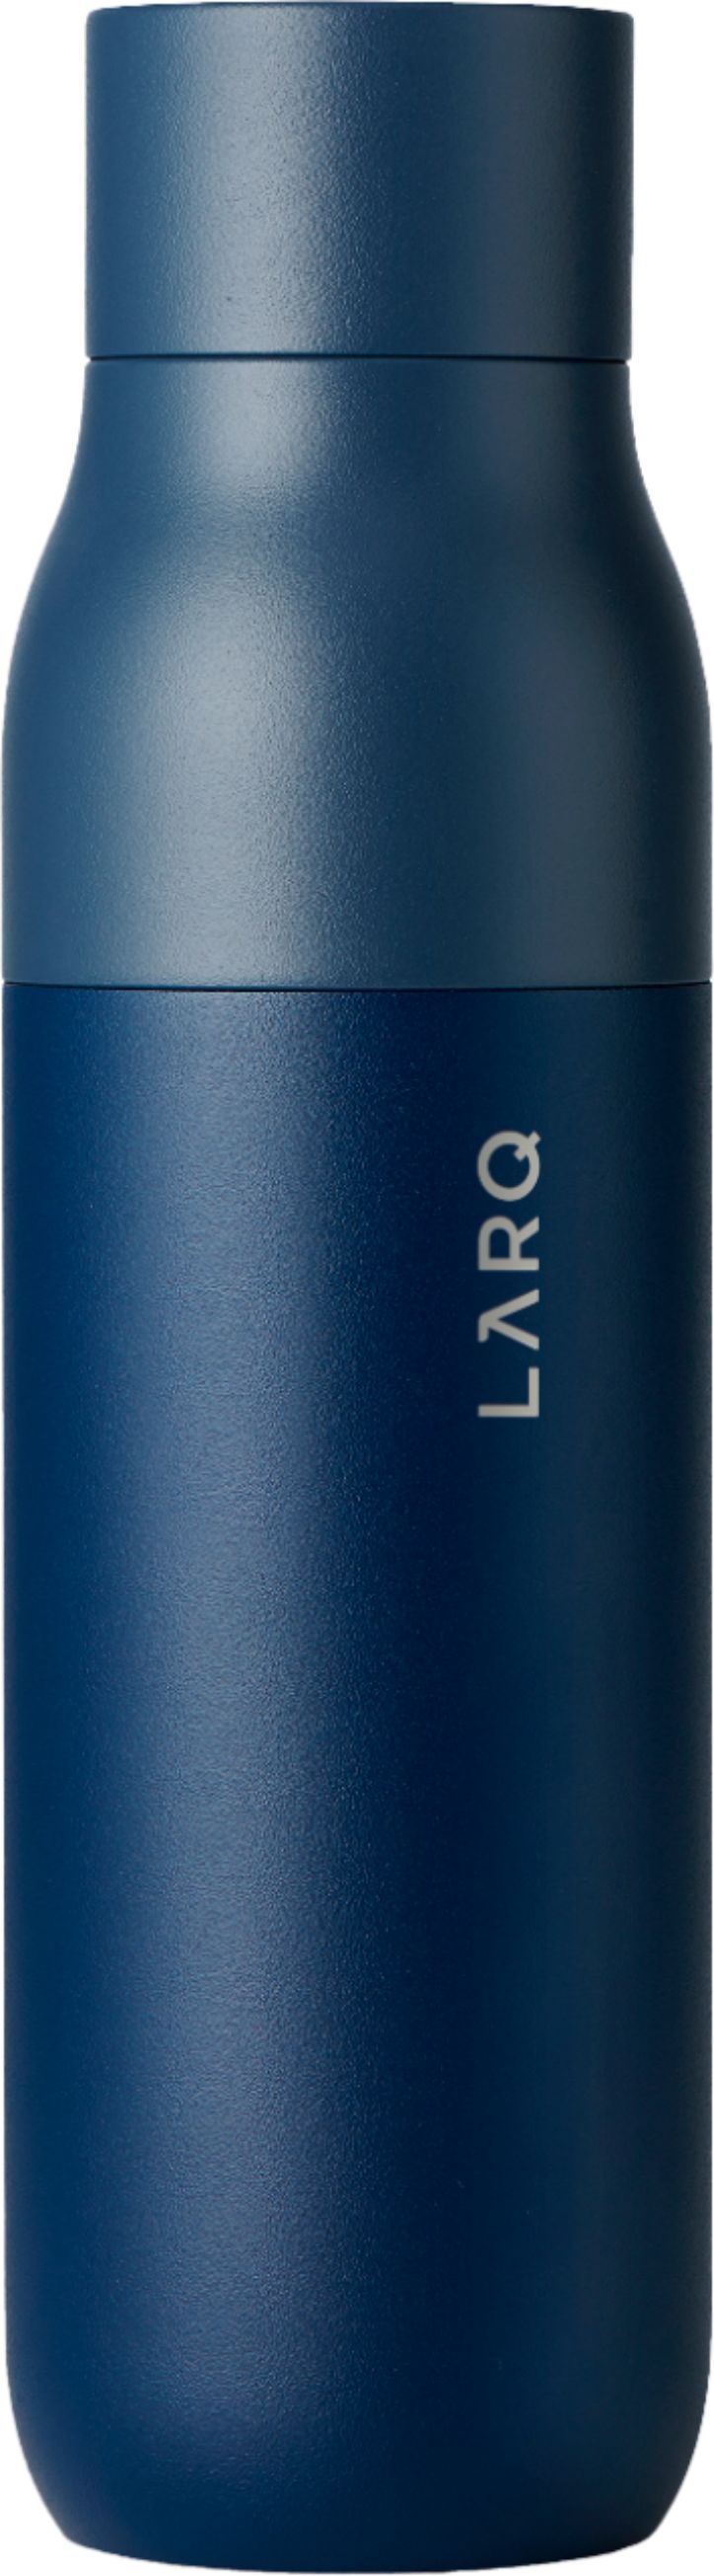 LARQ Bottle Filtered - Insulated Stainless Steel Water Bottle BPA Free with  Nano Zero Technology and Long-Lasting Filters, Granite White, 17oz